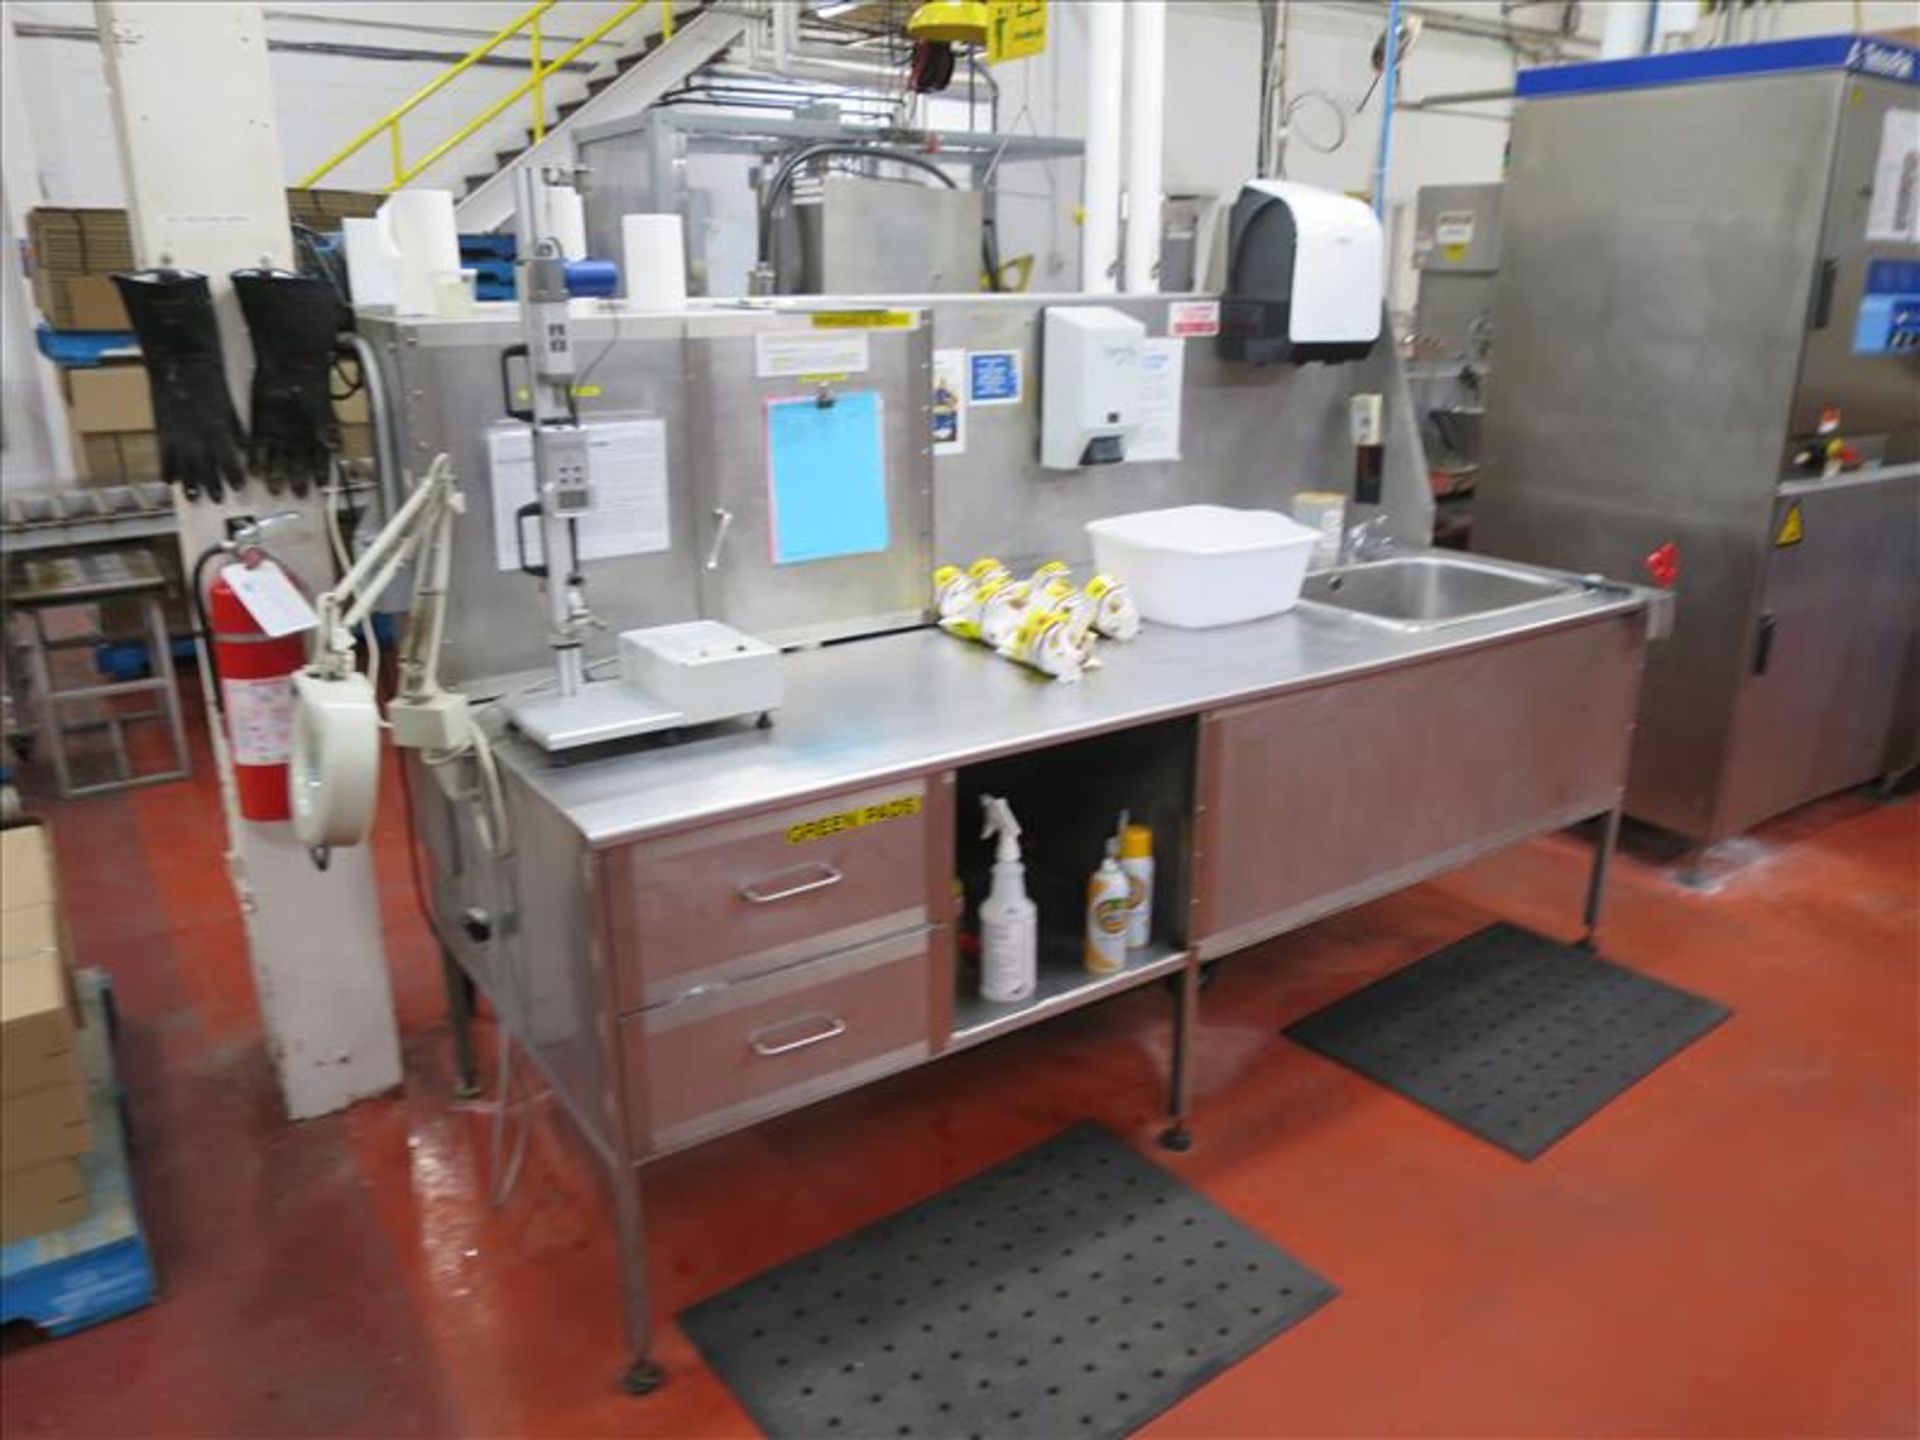 Stainless counter